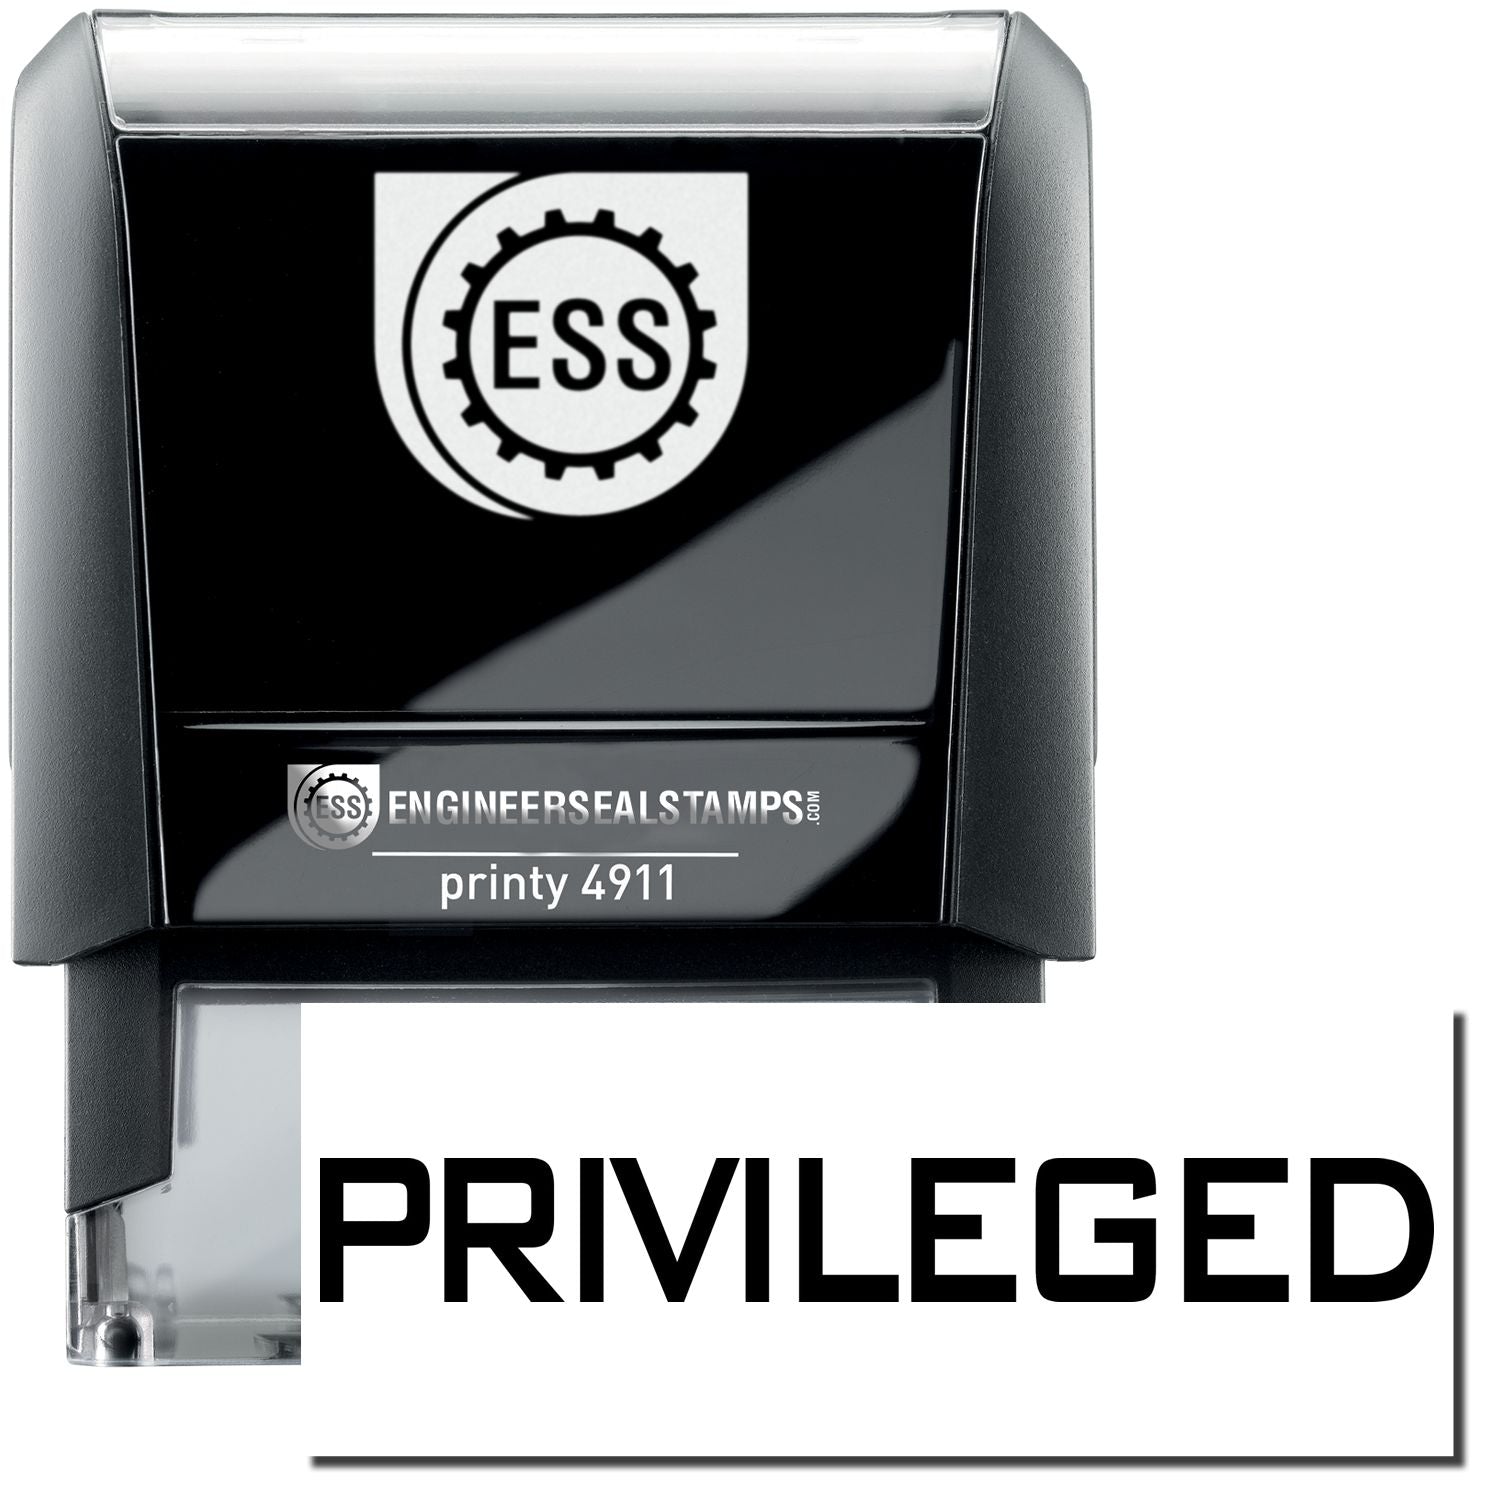 A self-inking stamp with a stamped image showing how the text "PRIVILEGED" is displayed after stamping.